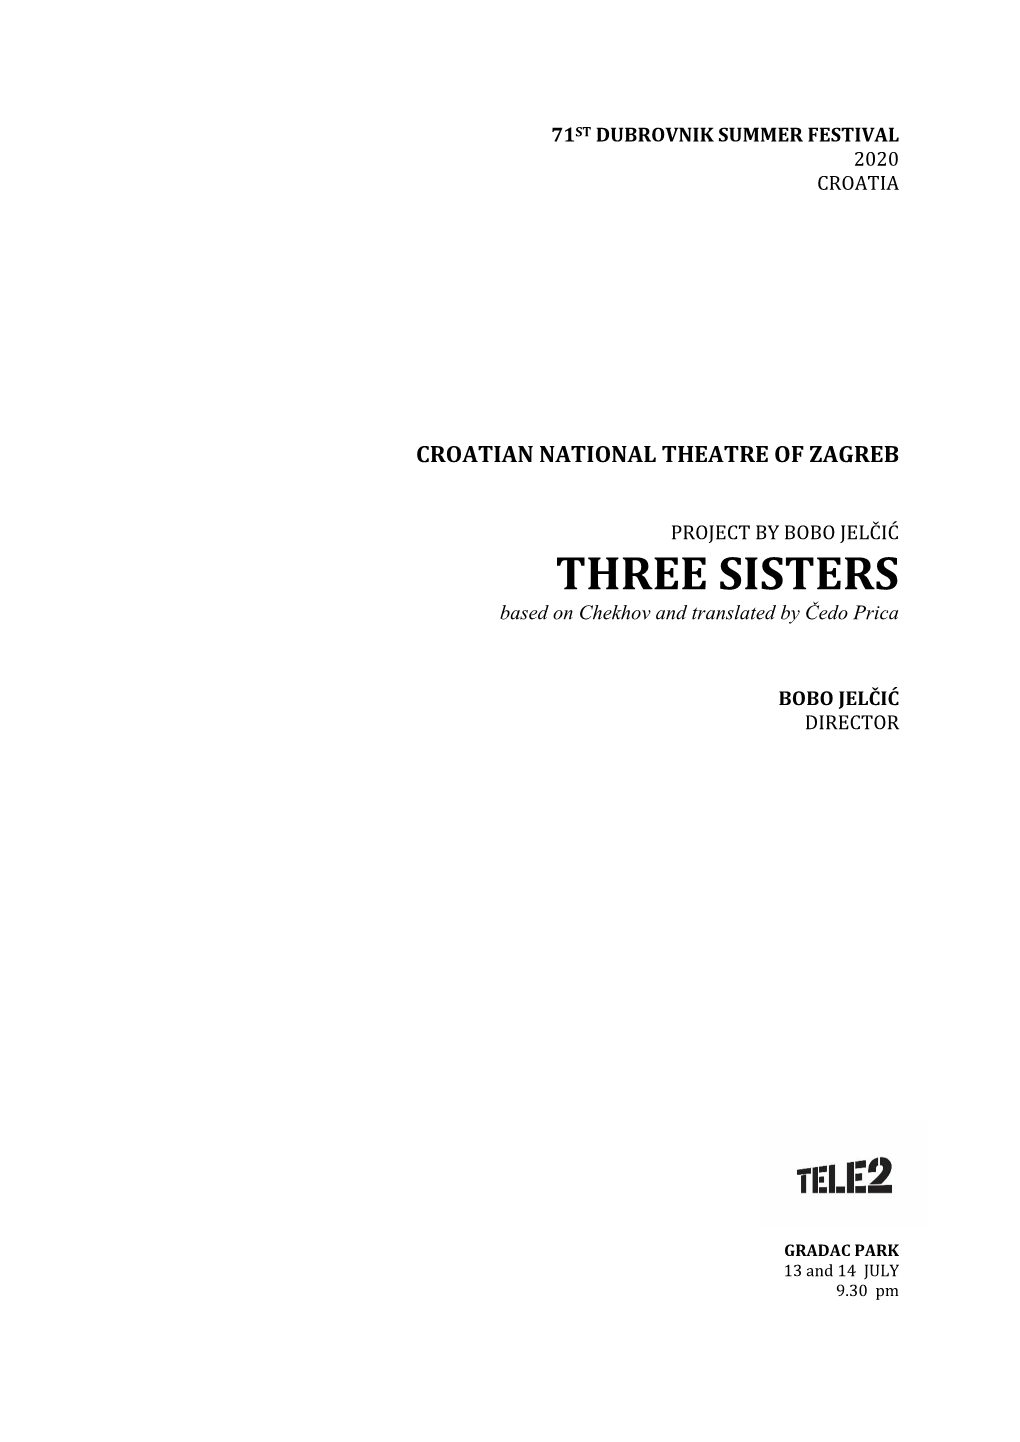 THREE SISTERS Based on Chekhov and Translated by Čedo Prica